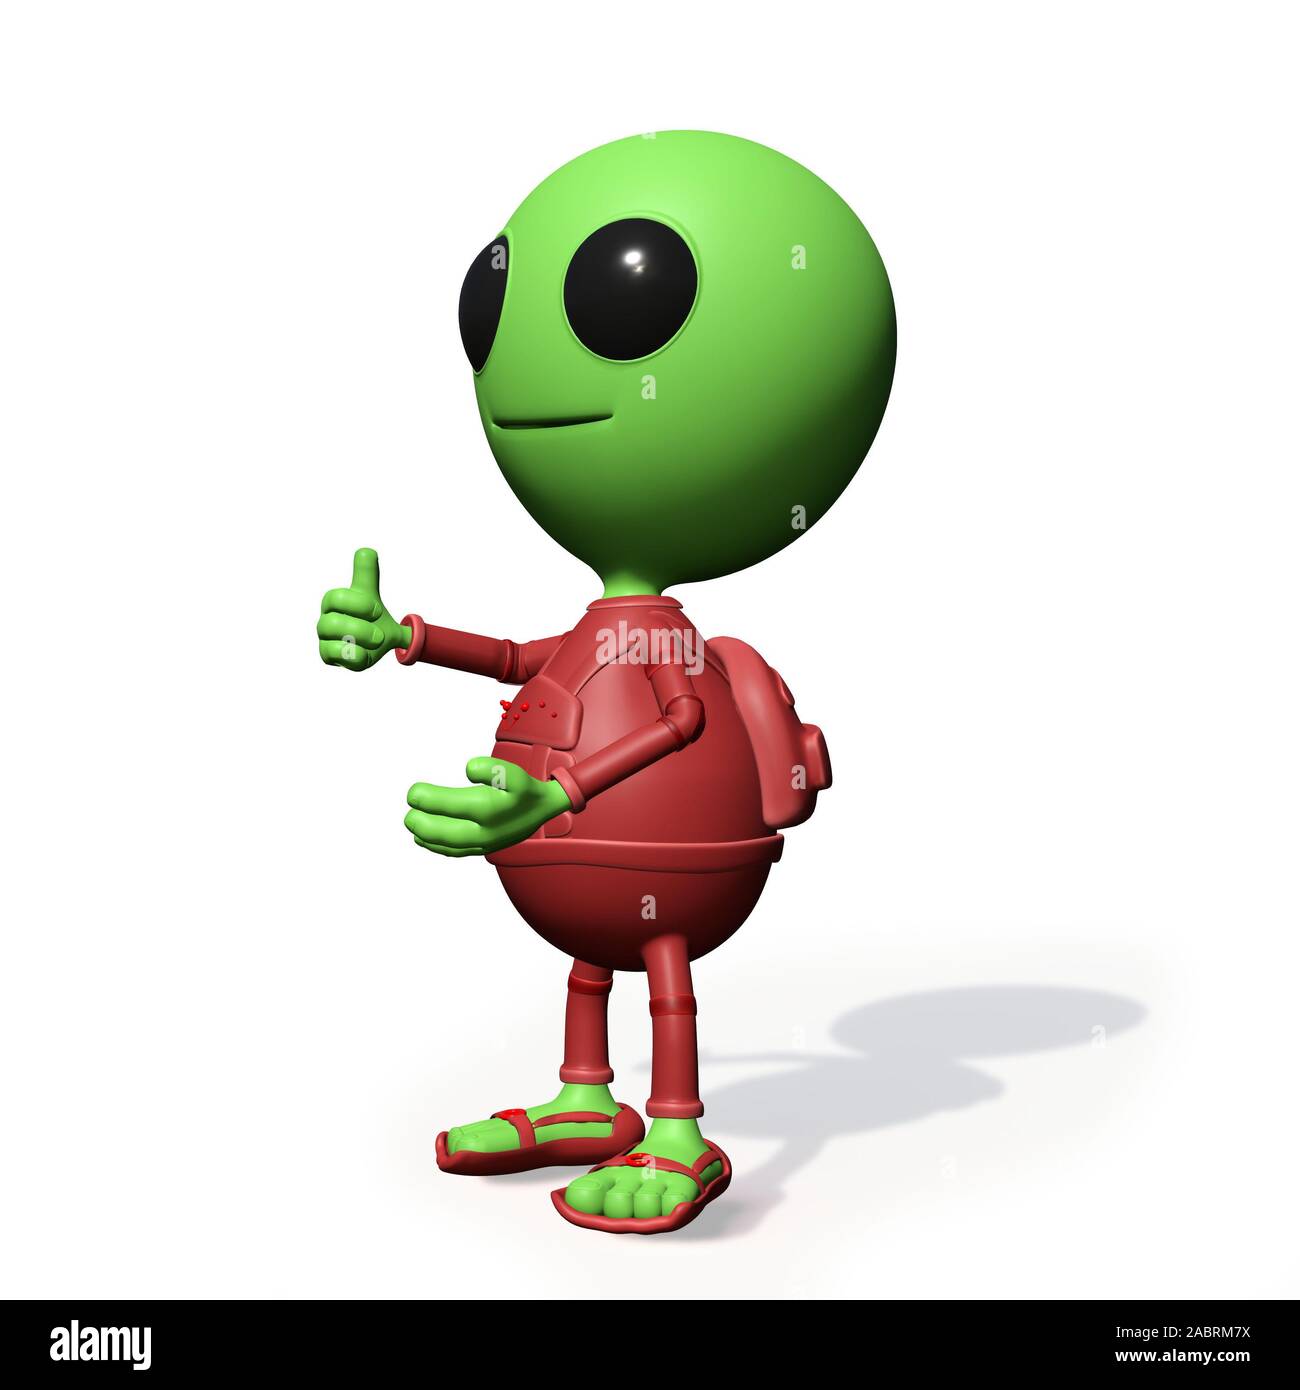 cute little alien cartoon character with thumbs up Stock Photo